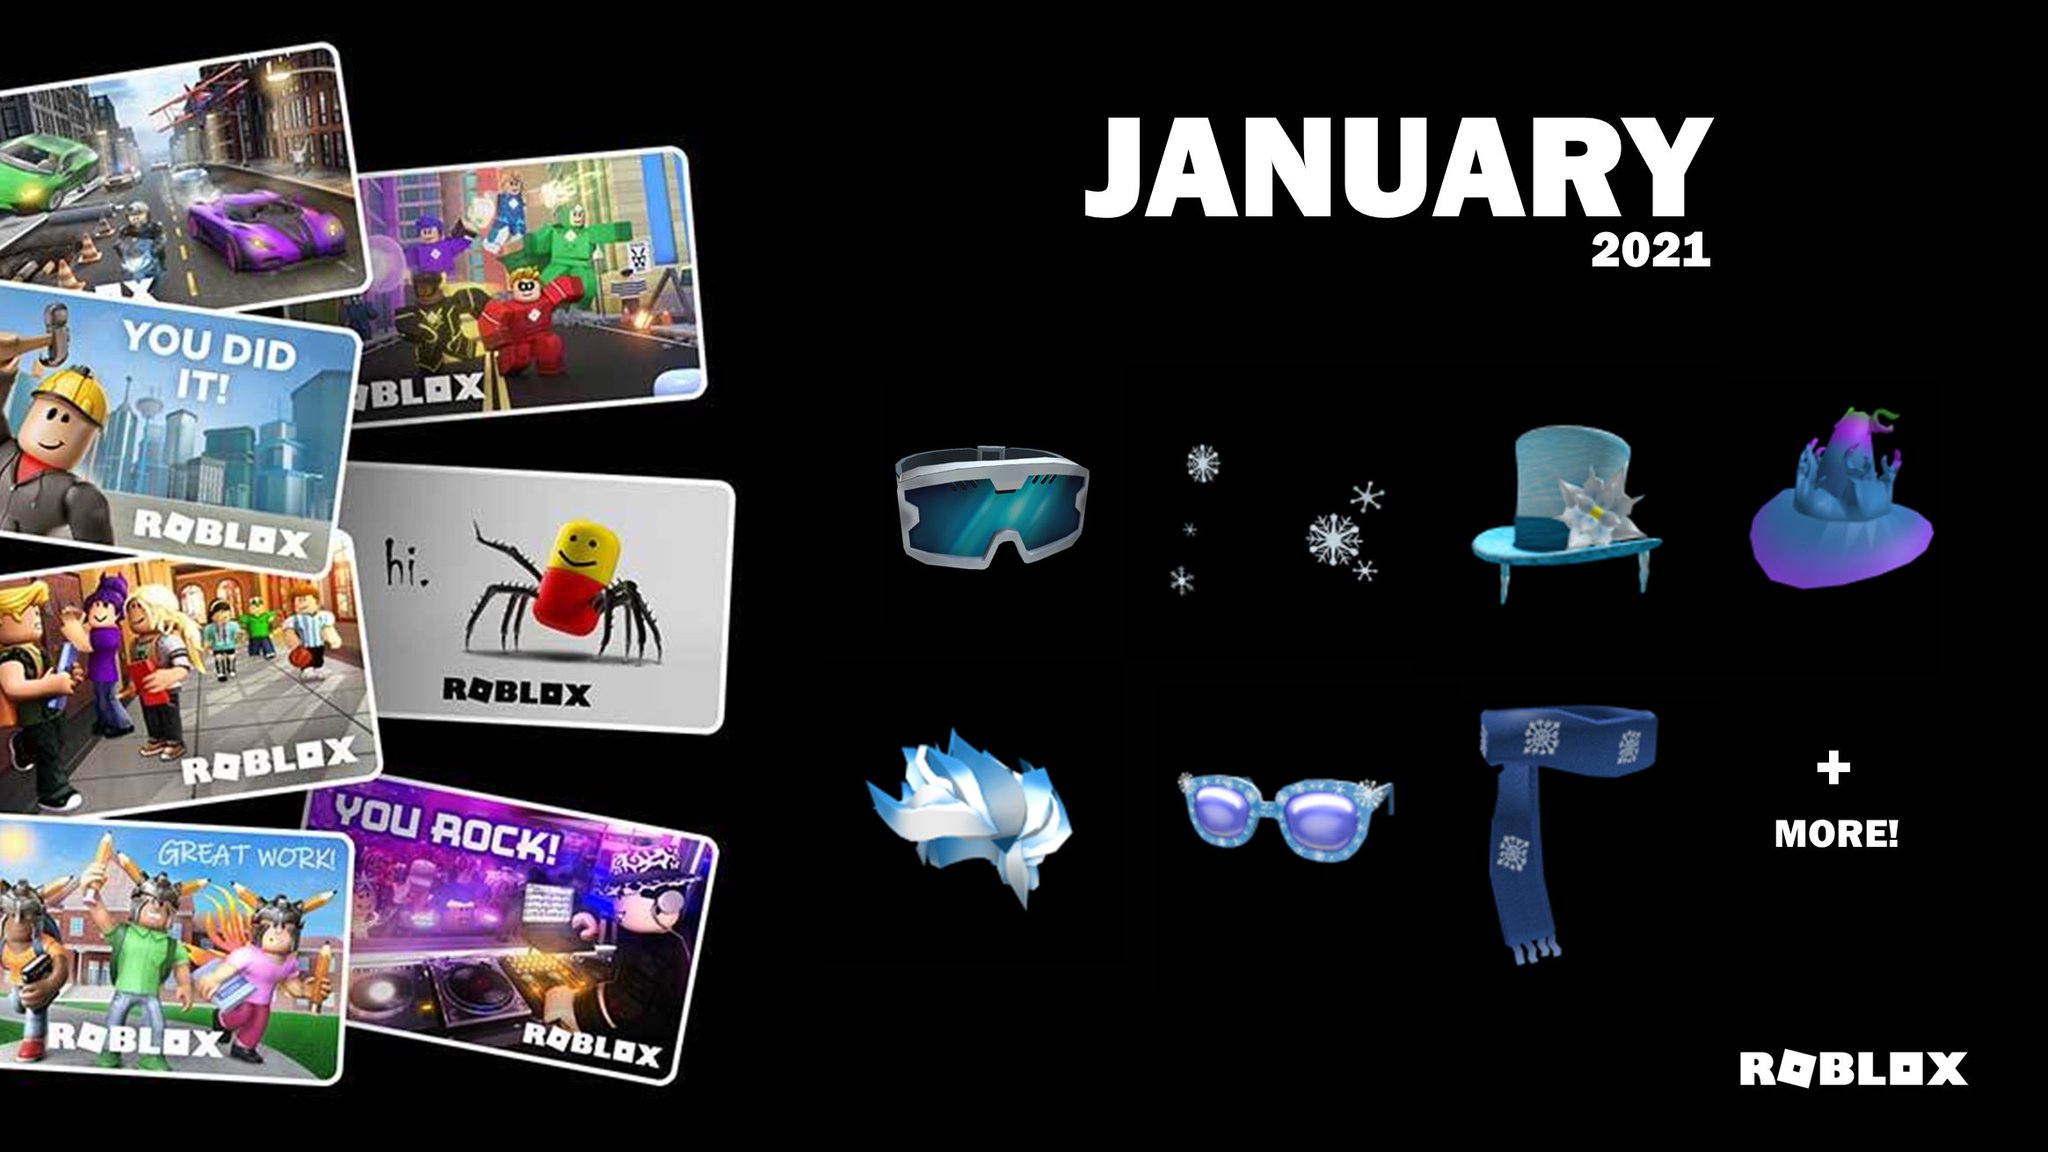 Bloxy News On Twitter The Roblox Gift Card Virtual Items And Their Corresponding Stores For January 2021 Are Now Available Check Them Out Here Https T Co Pujwqlz5yt Purchase A Gift Card - can u gift in roblox